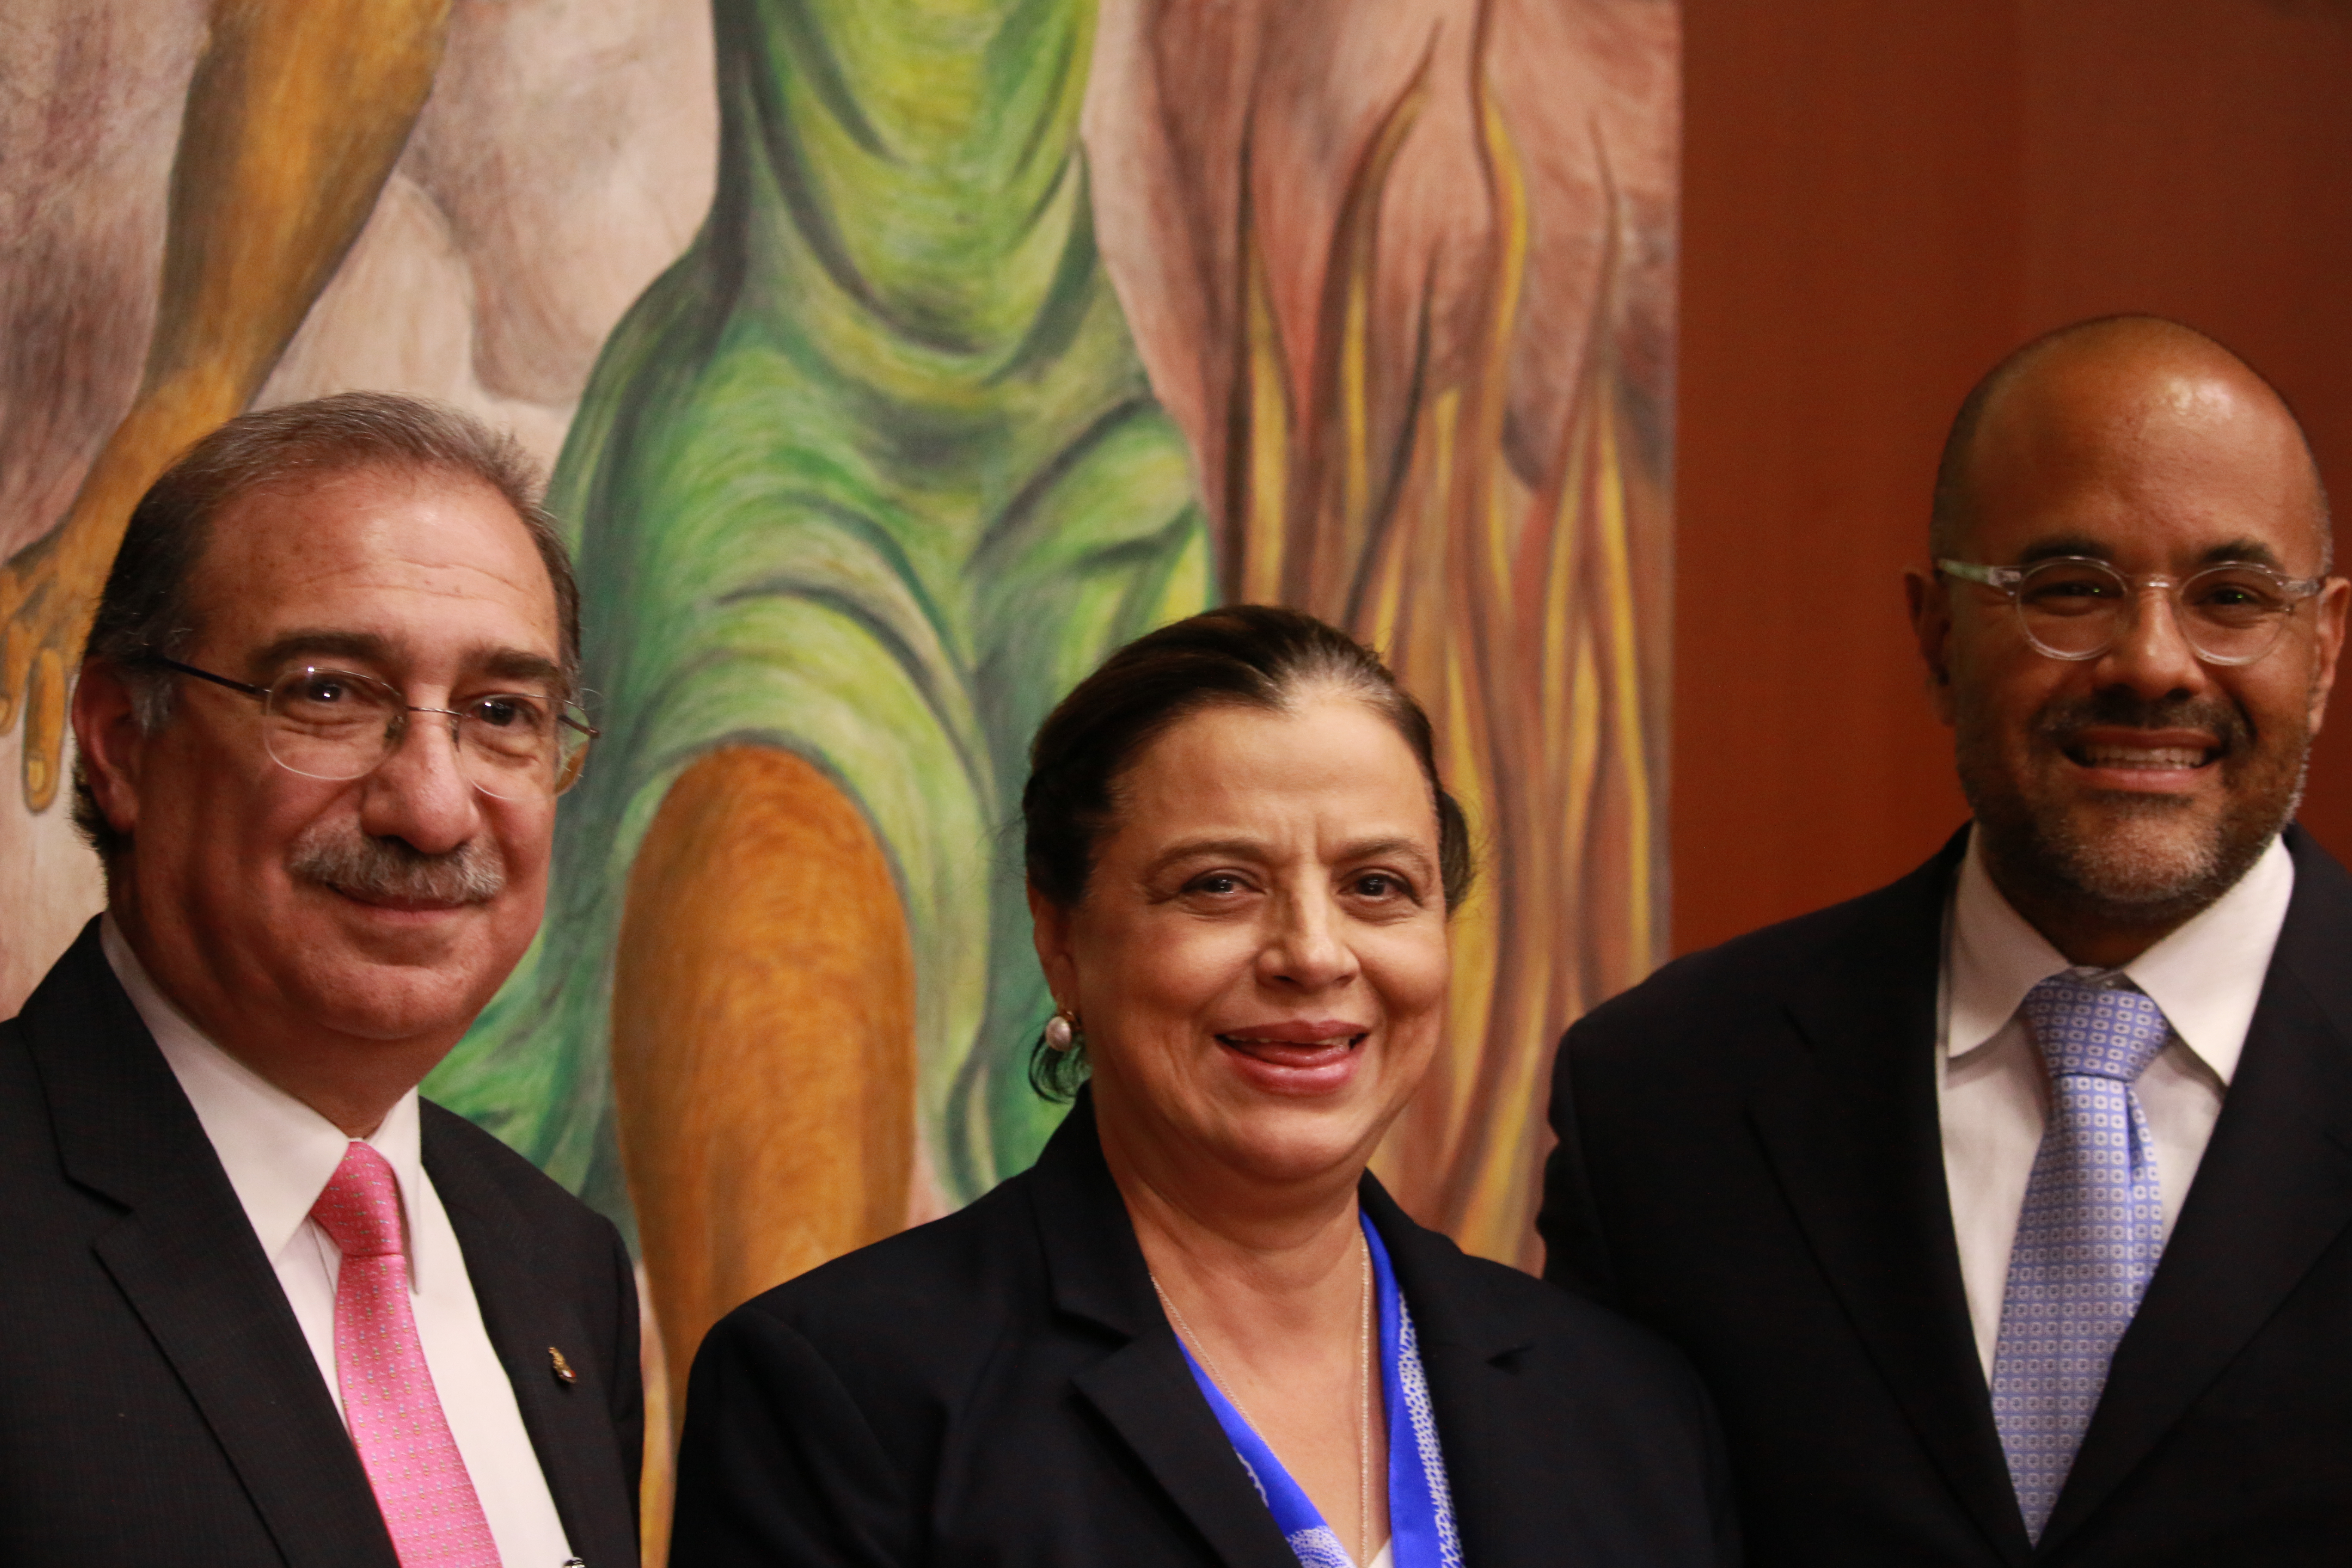 Justice Alberto Pérez Dayán of the Mexican Supreme Court, Dr. Ma. Leoba Castañeda Rivas, Director of the UNAM Law School, and Dr. David Shirk, Director of Justice in Mexico and Associate Professor of Political Science at the University of San Diego. The photo was taken at OASIS symposium held at UNAM Law School, Sept 24-25, 2015.